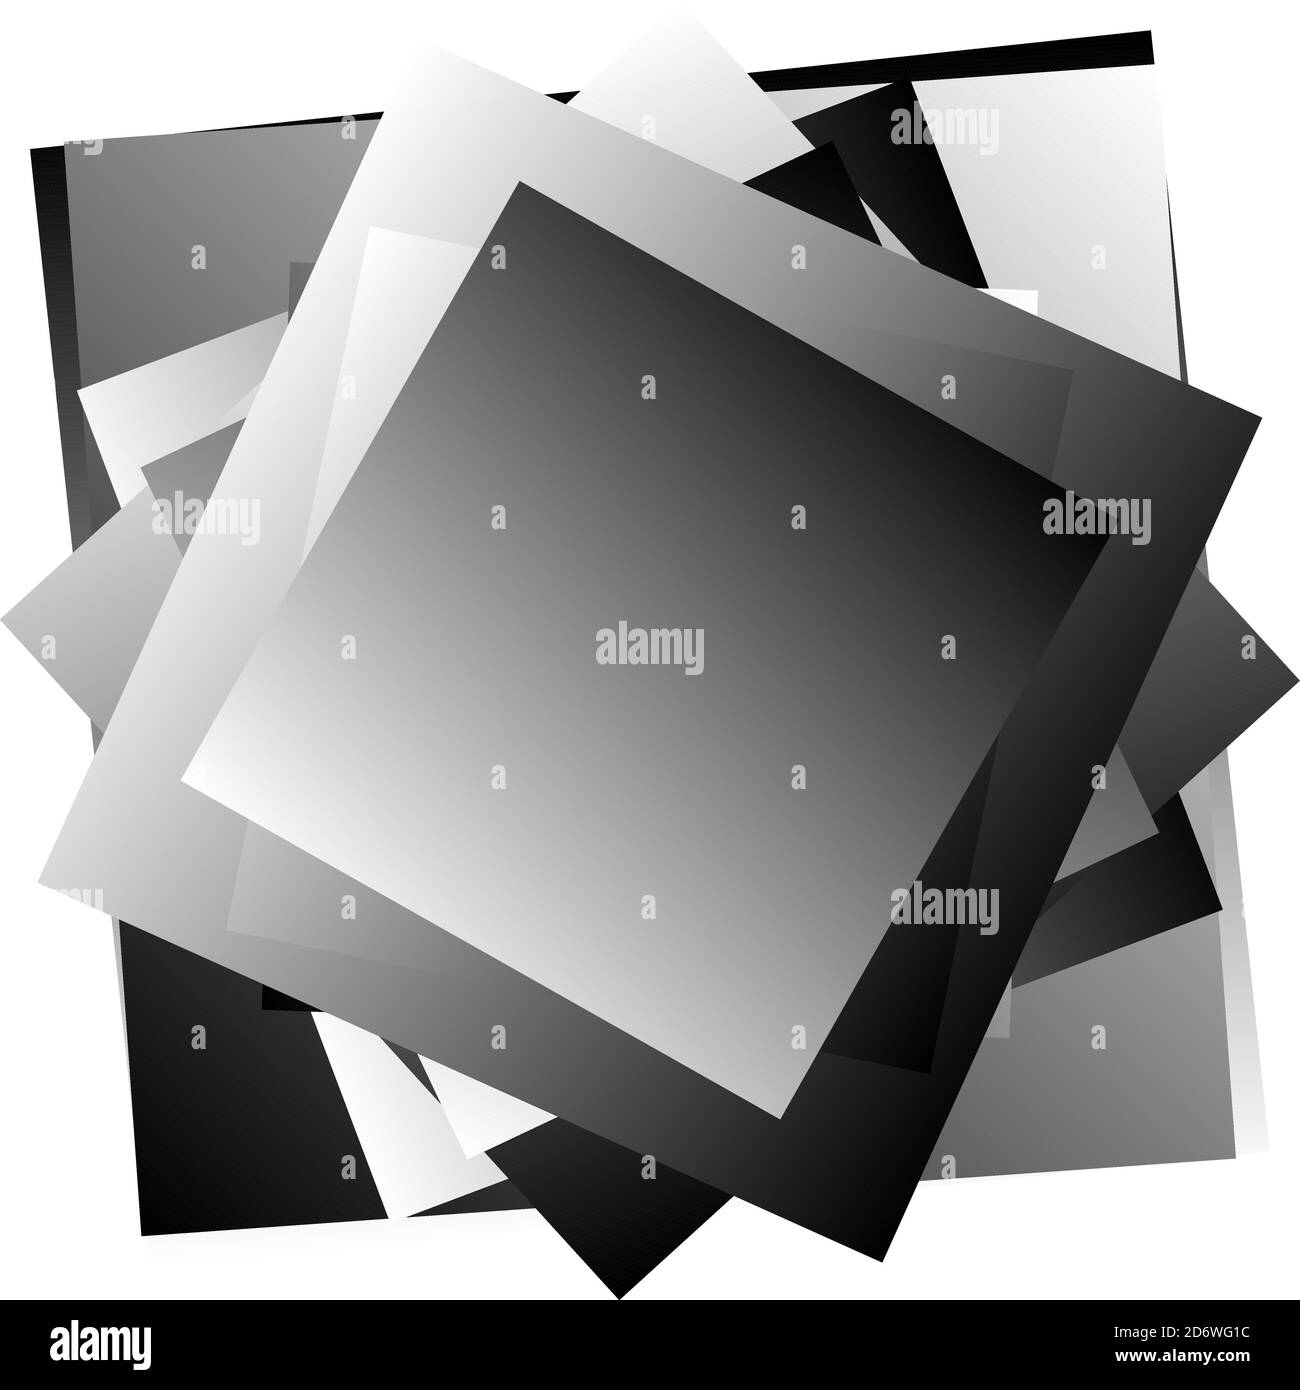 Randxom rotated overlap chaotic Squares vector illustration. Squares spiral stack Stock Vector